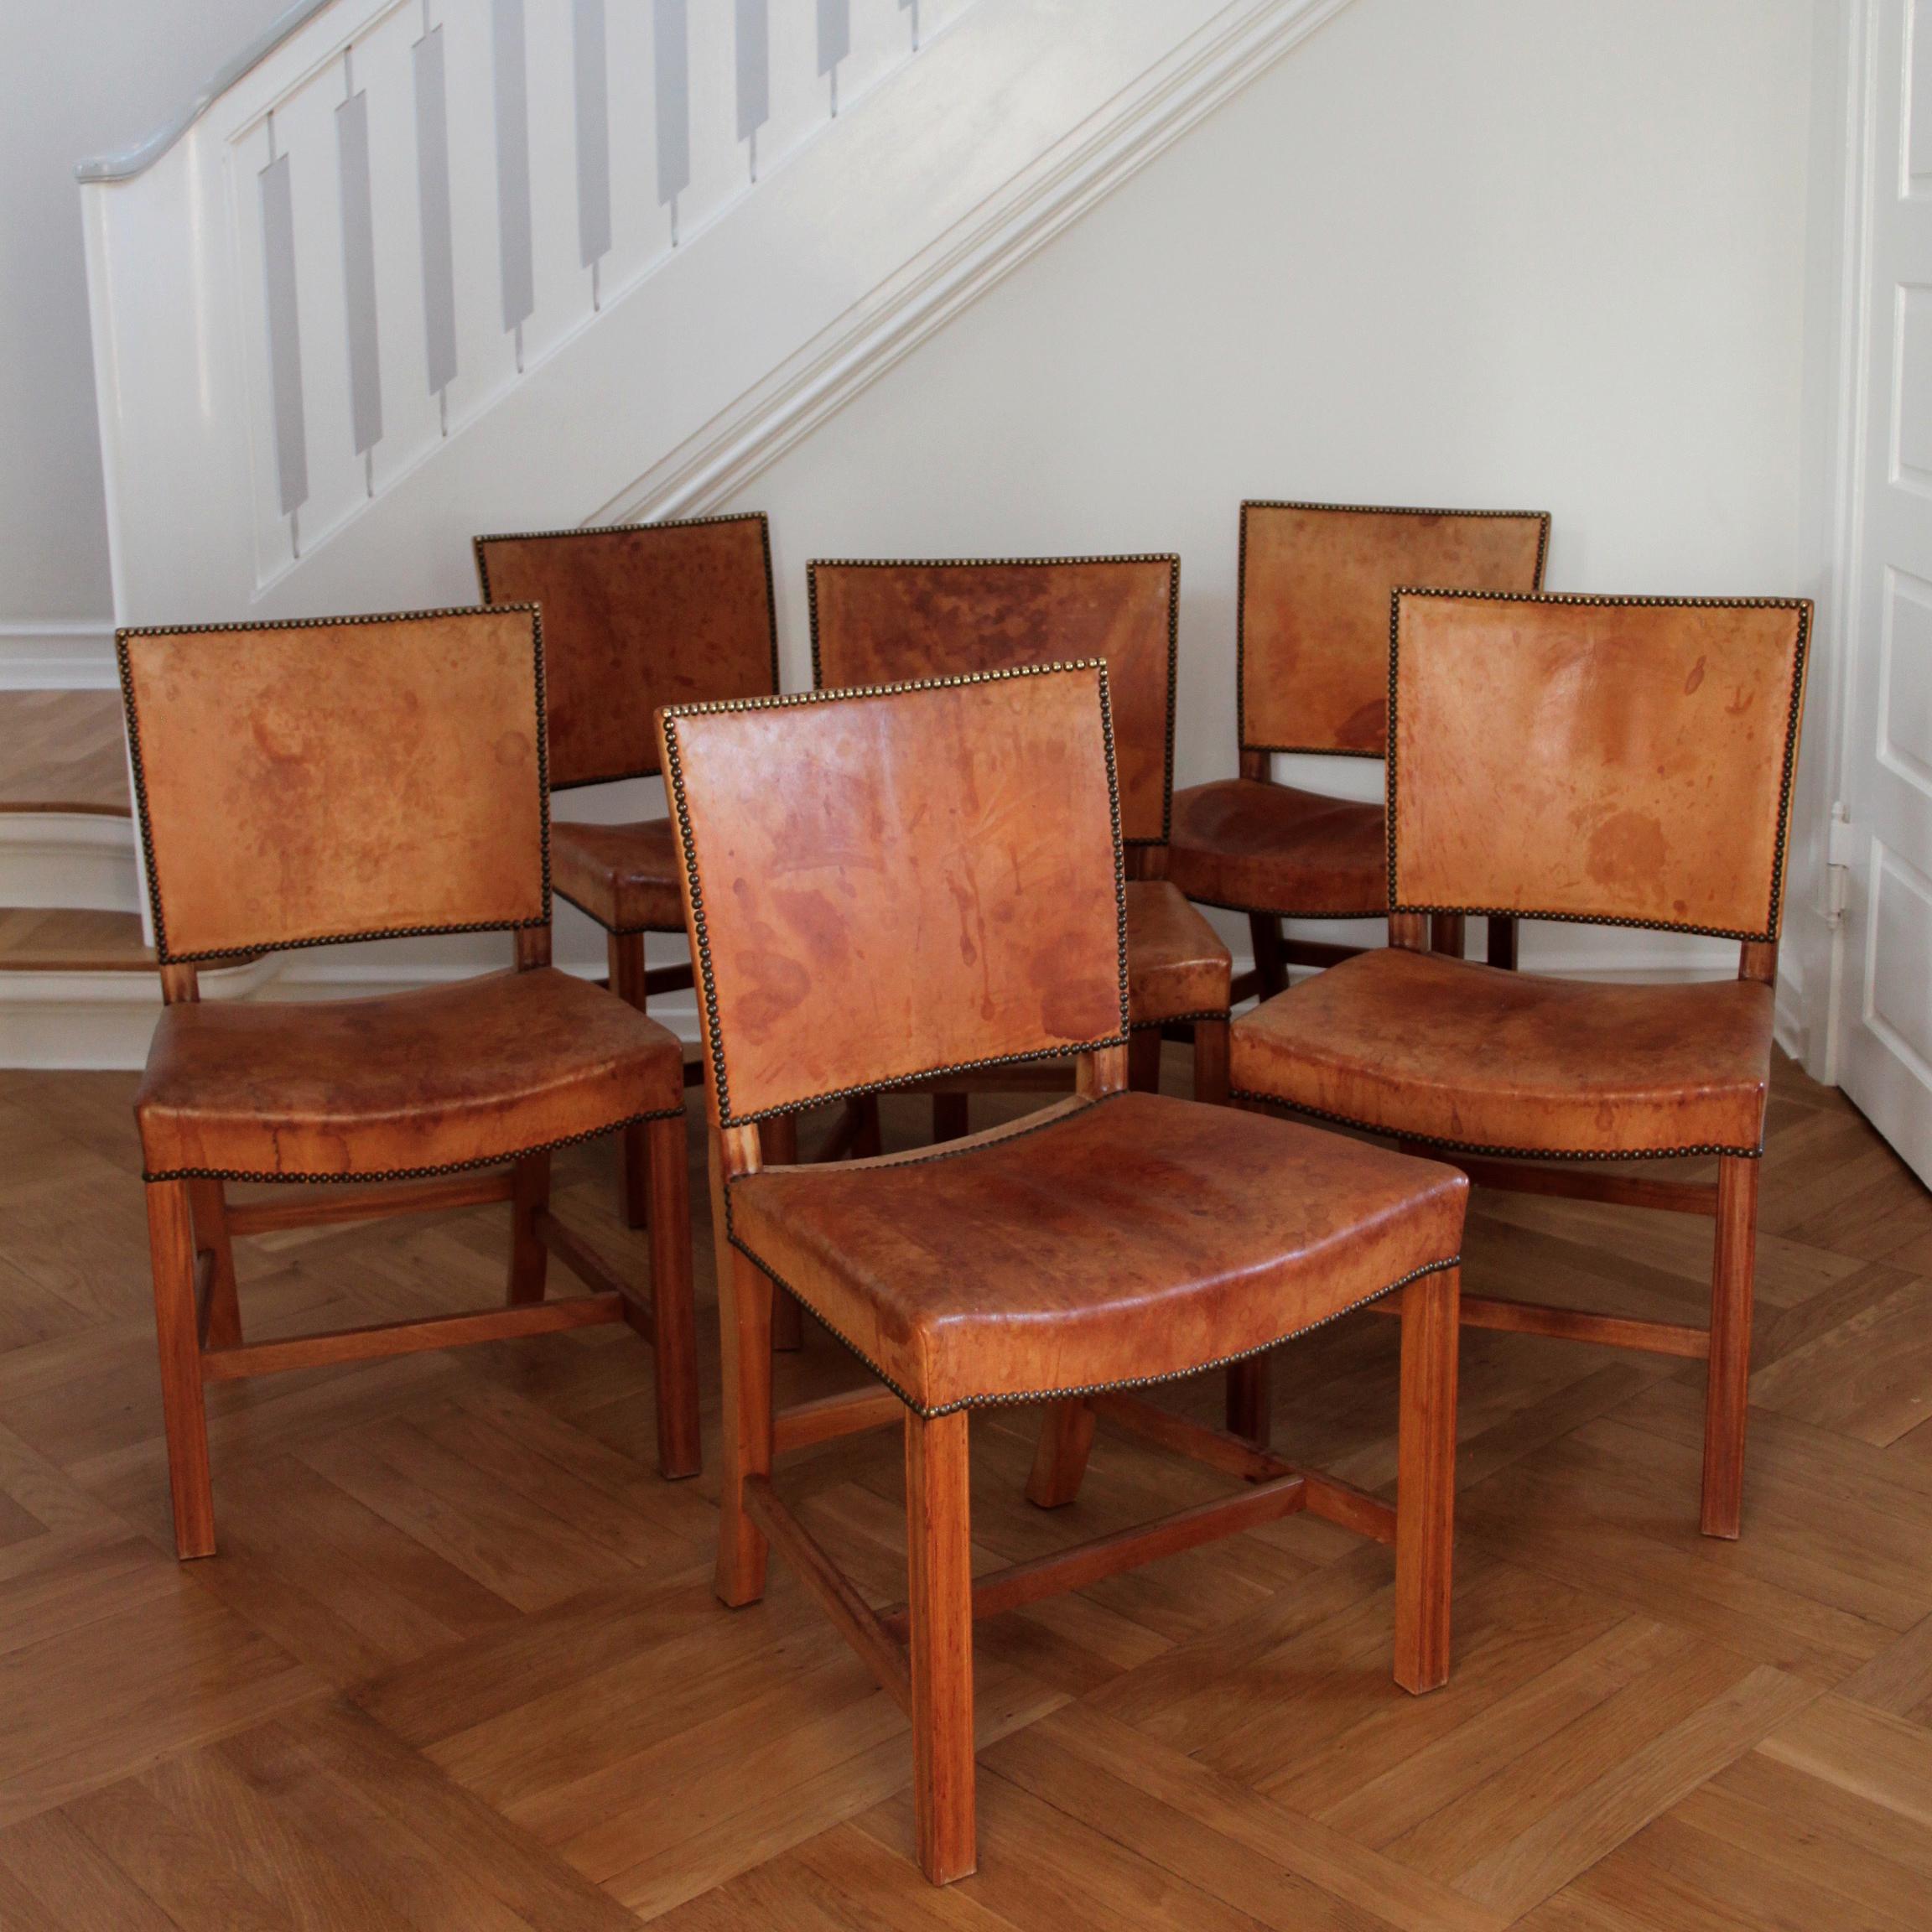 Oiled Six Kaare Klint Red Chairs, Mahogany and Original Niger Leather